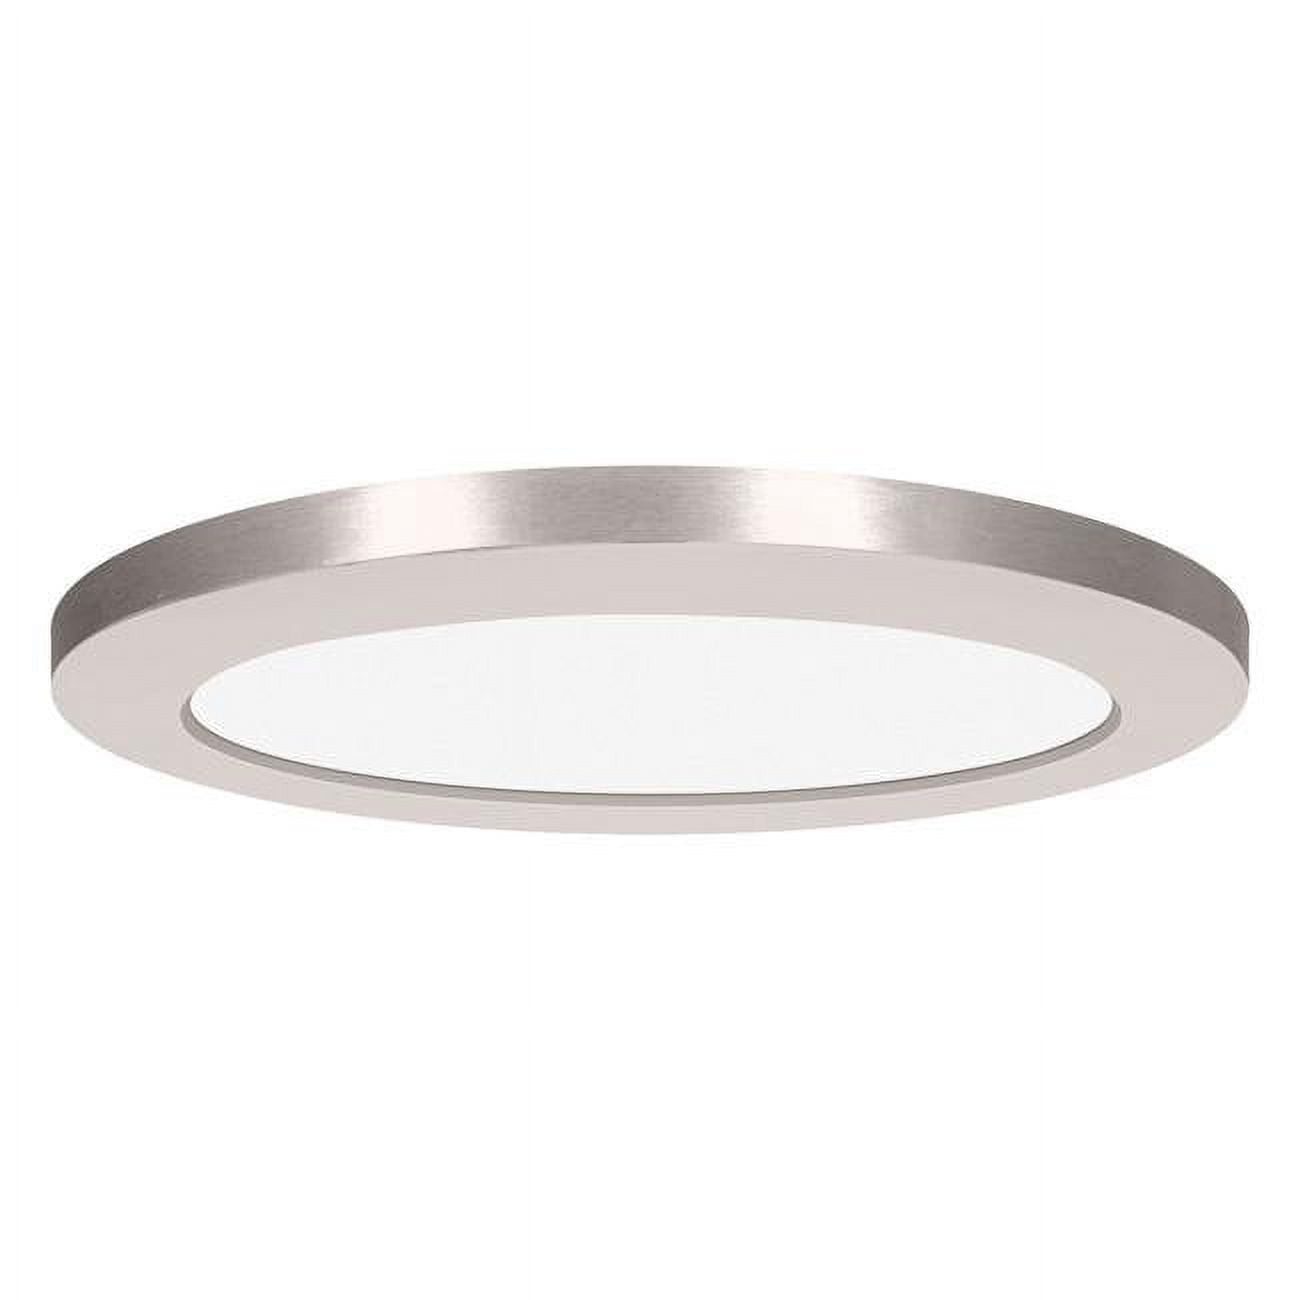 Picture of Access Lighting 20836LEDD-BS-ACR 7 in. ModPLUS 120-277V LED Round Flush Mount Ceiling Light&#44; Brushed Steel - Small